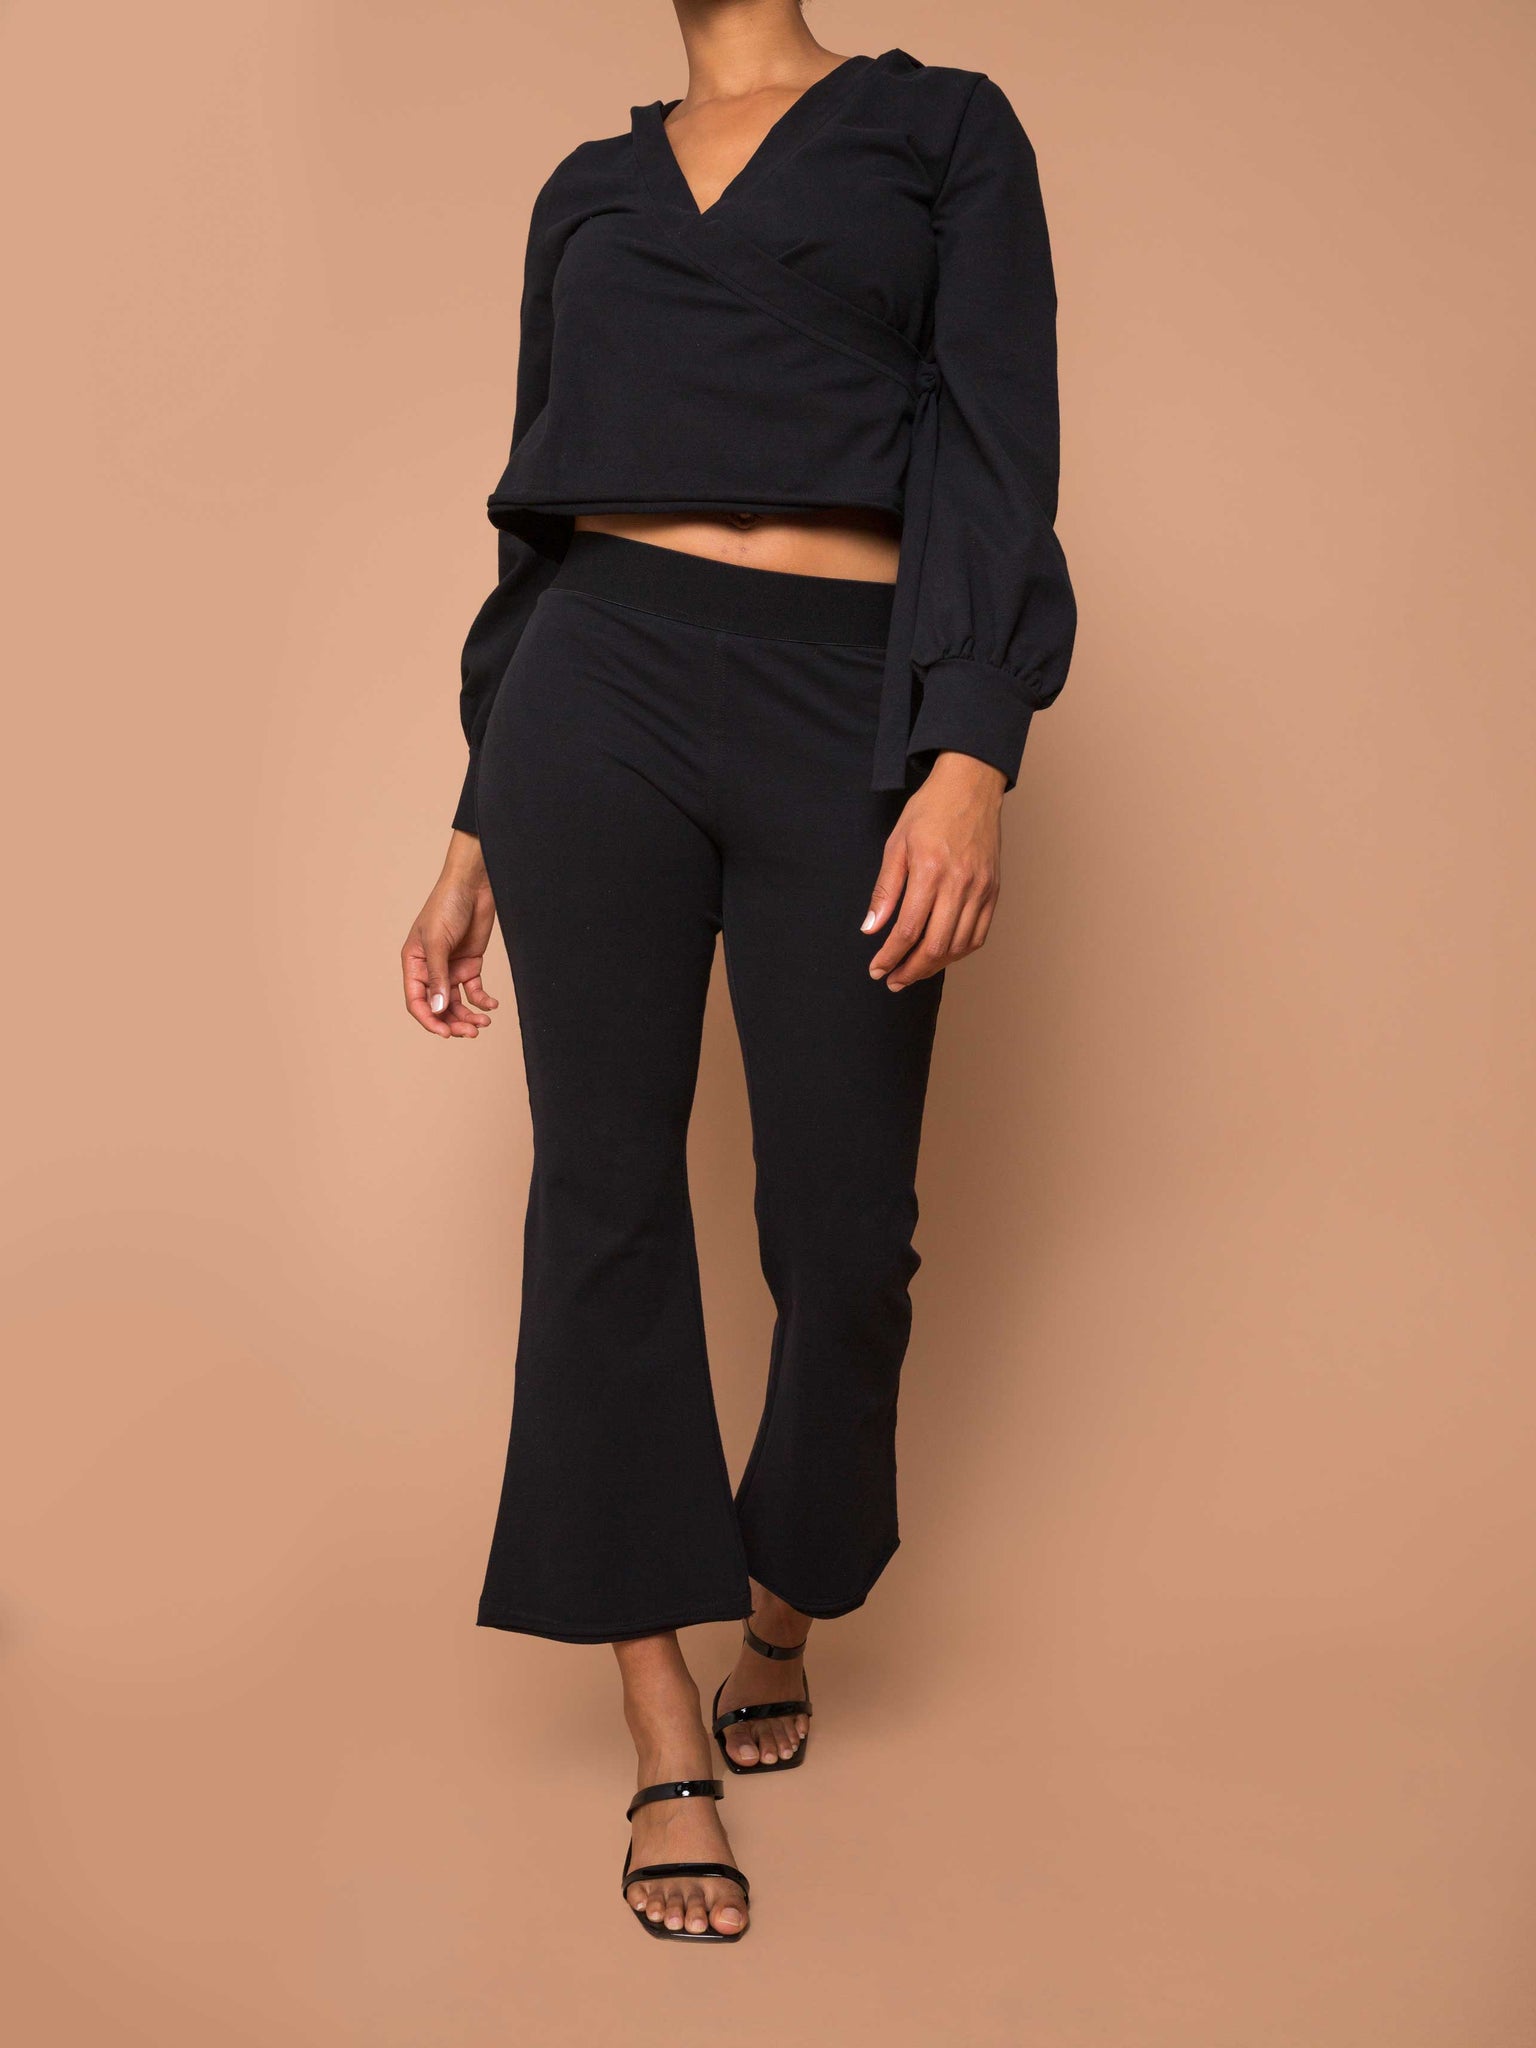 Pieces cropped kick flare pants in black